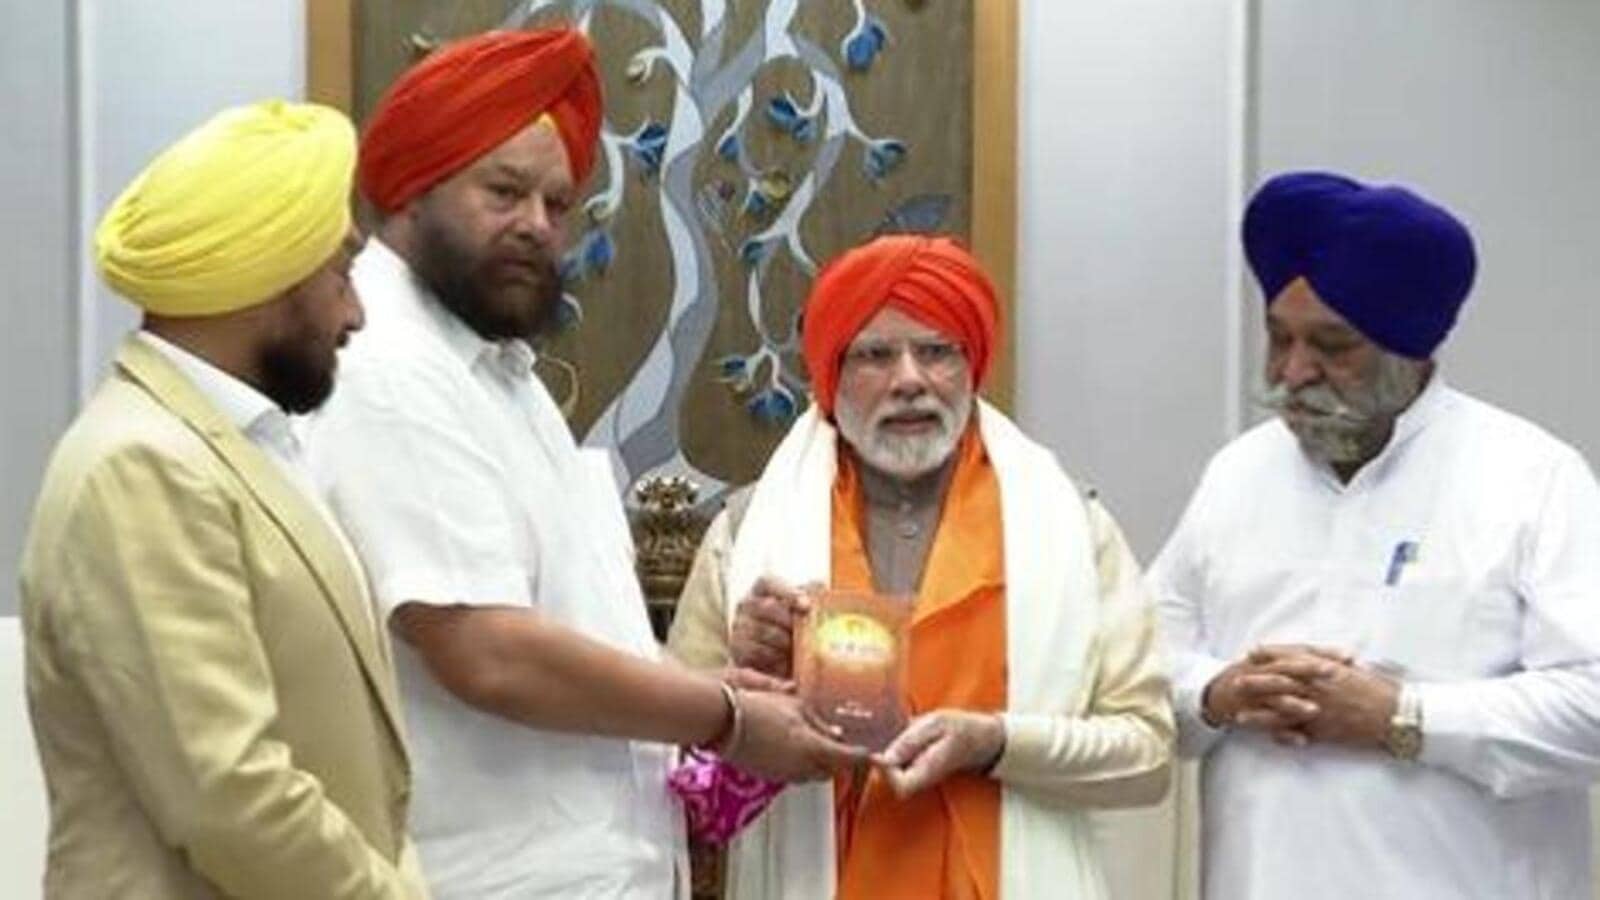 Sikh delegation meets PM Modi at his residence to offer blessings